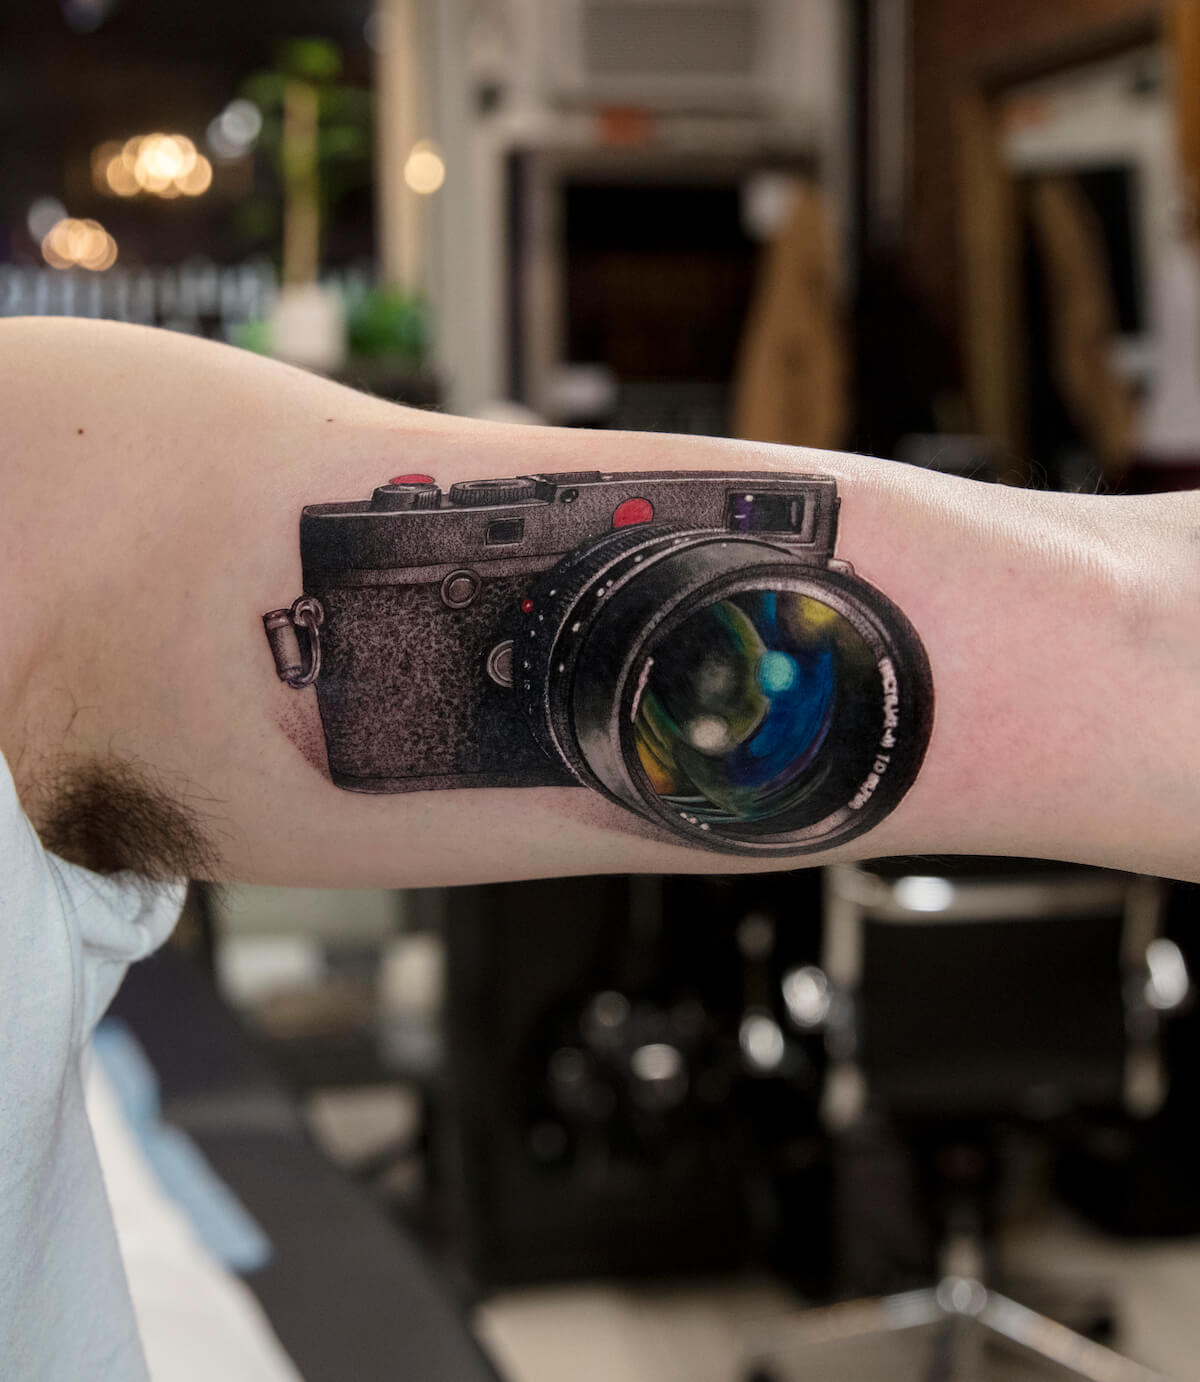 101 Best Camera Tattoo Ideas You'll Have To See To Believe!